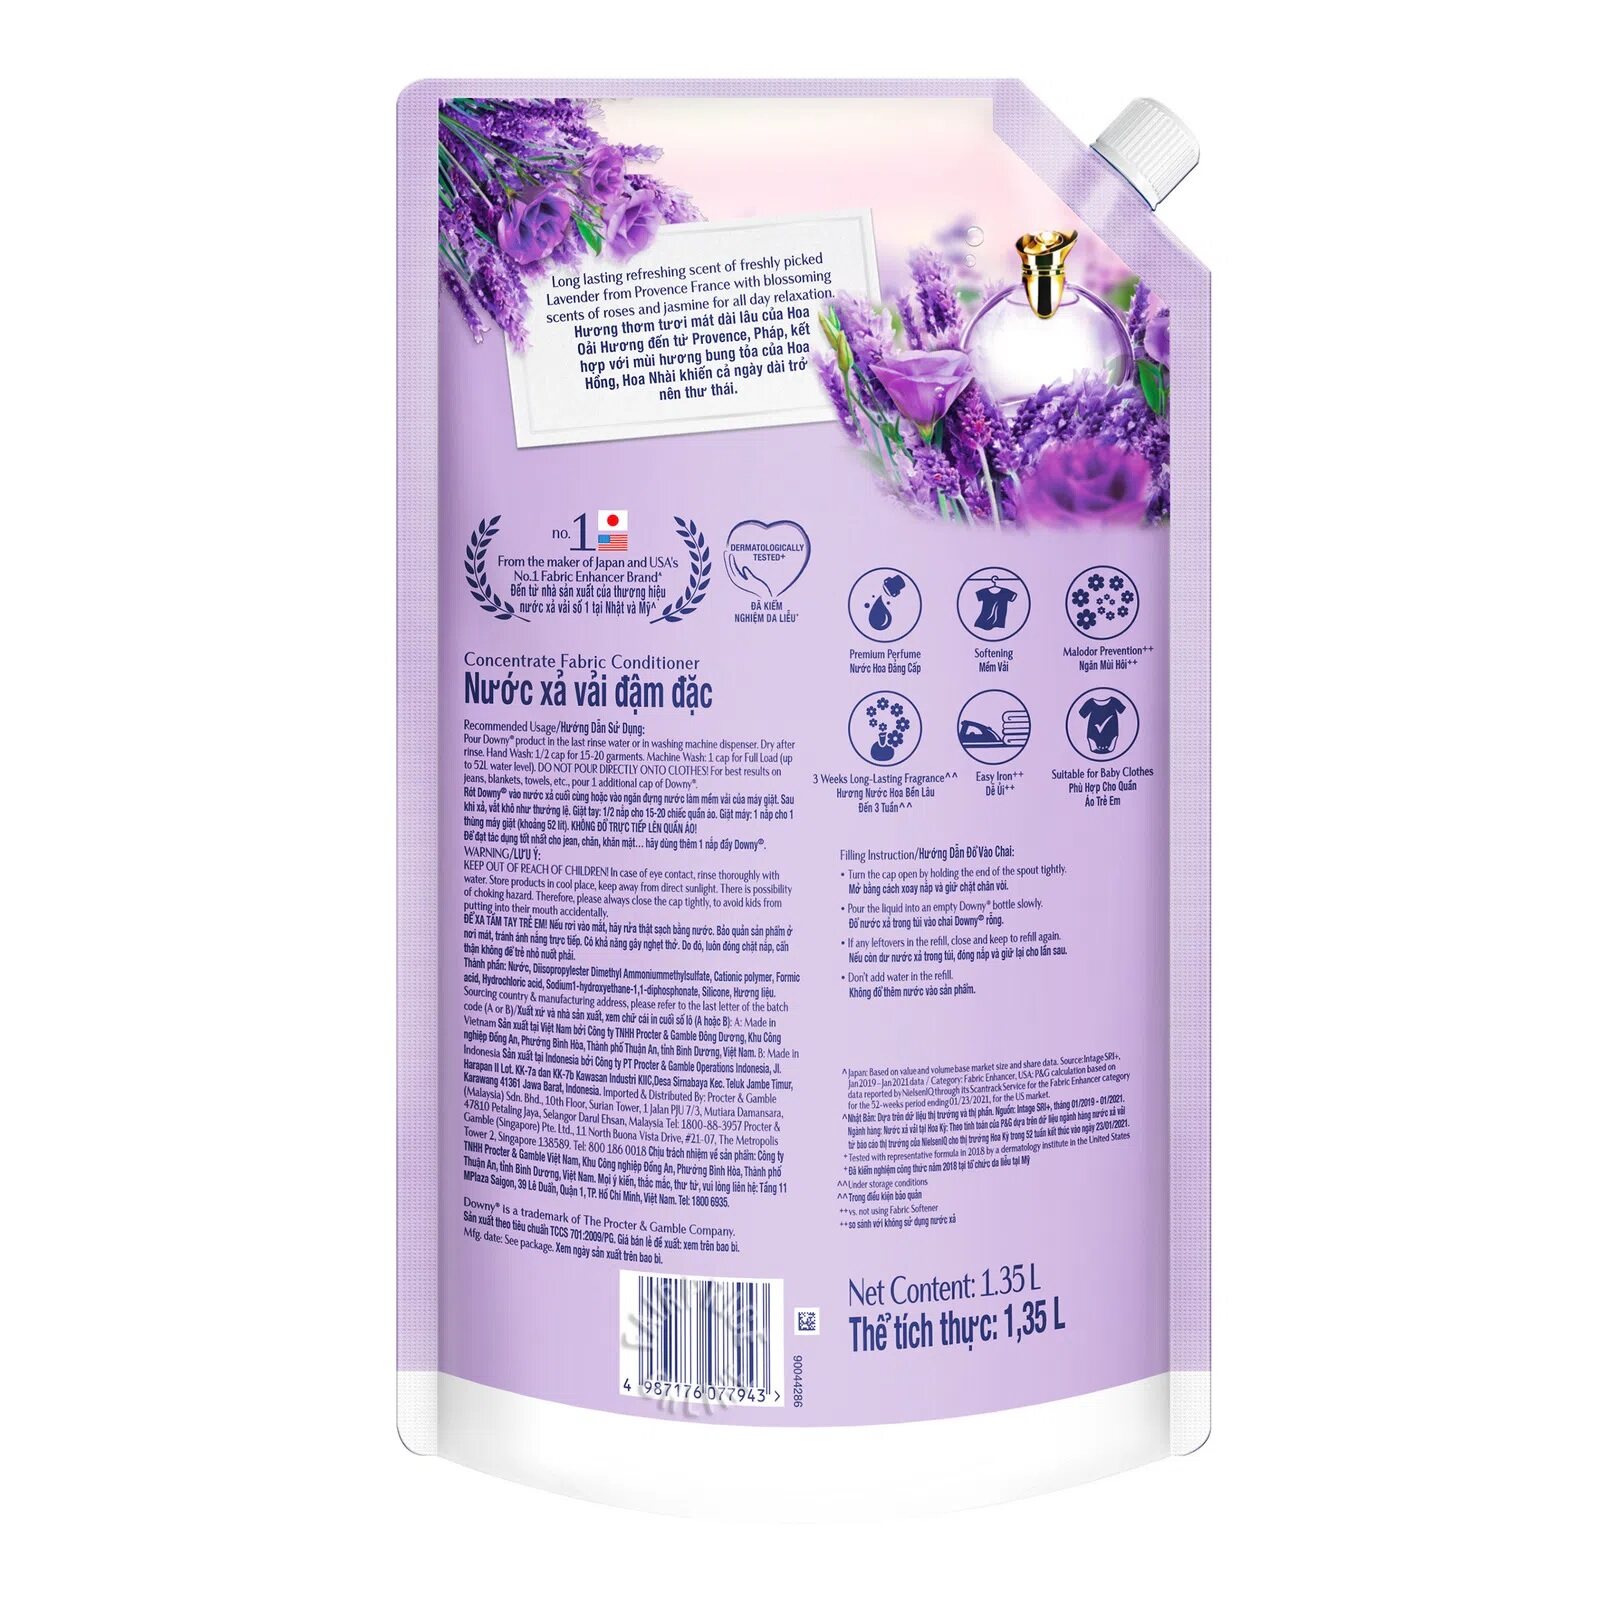 Downy Premium Parfum French Lavender Concentrate Fabric Conditioner 1350ml